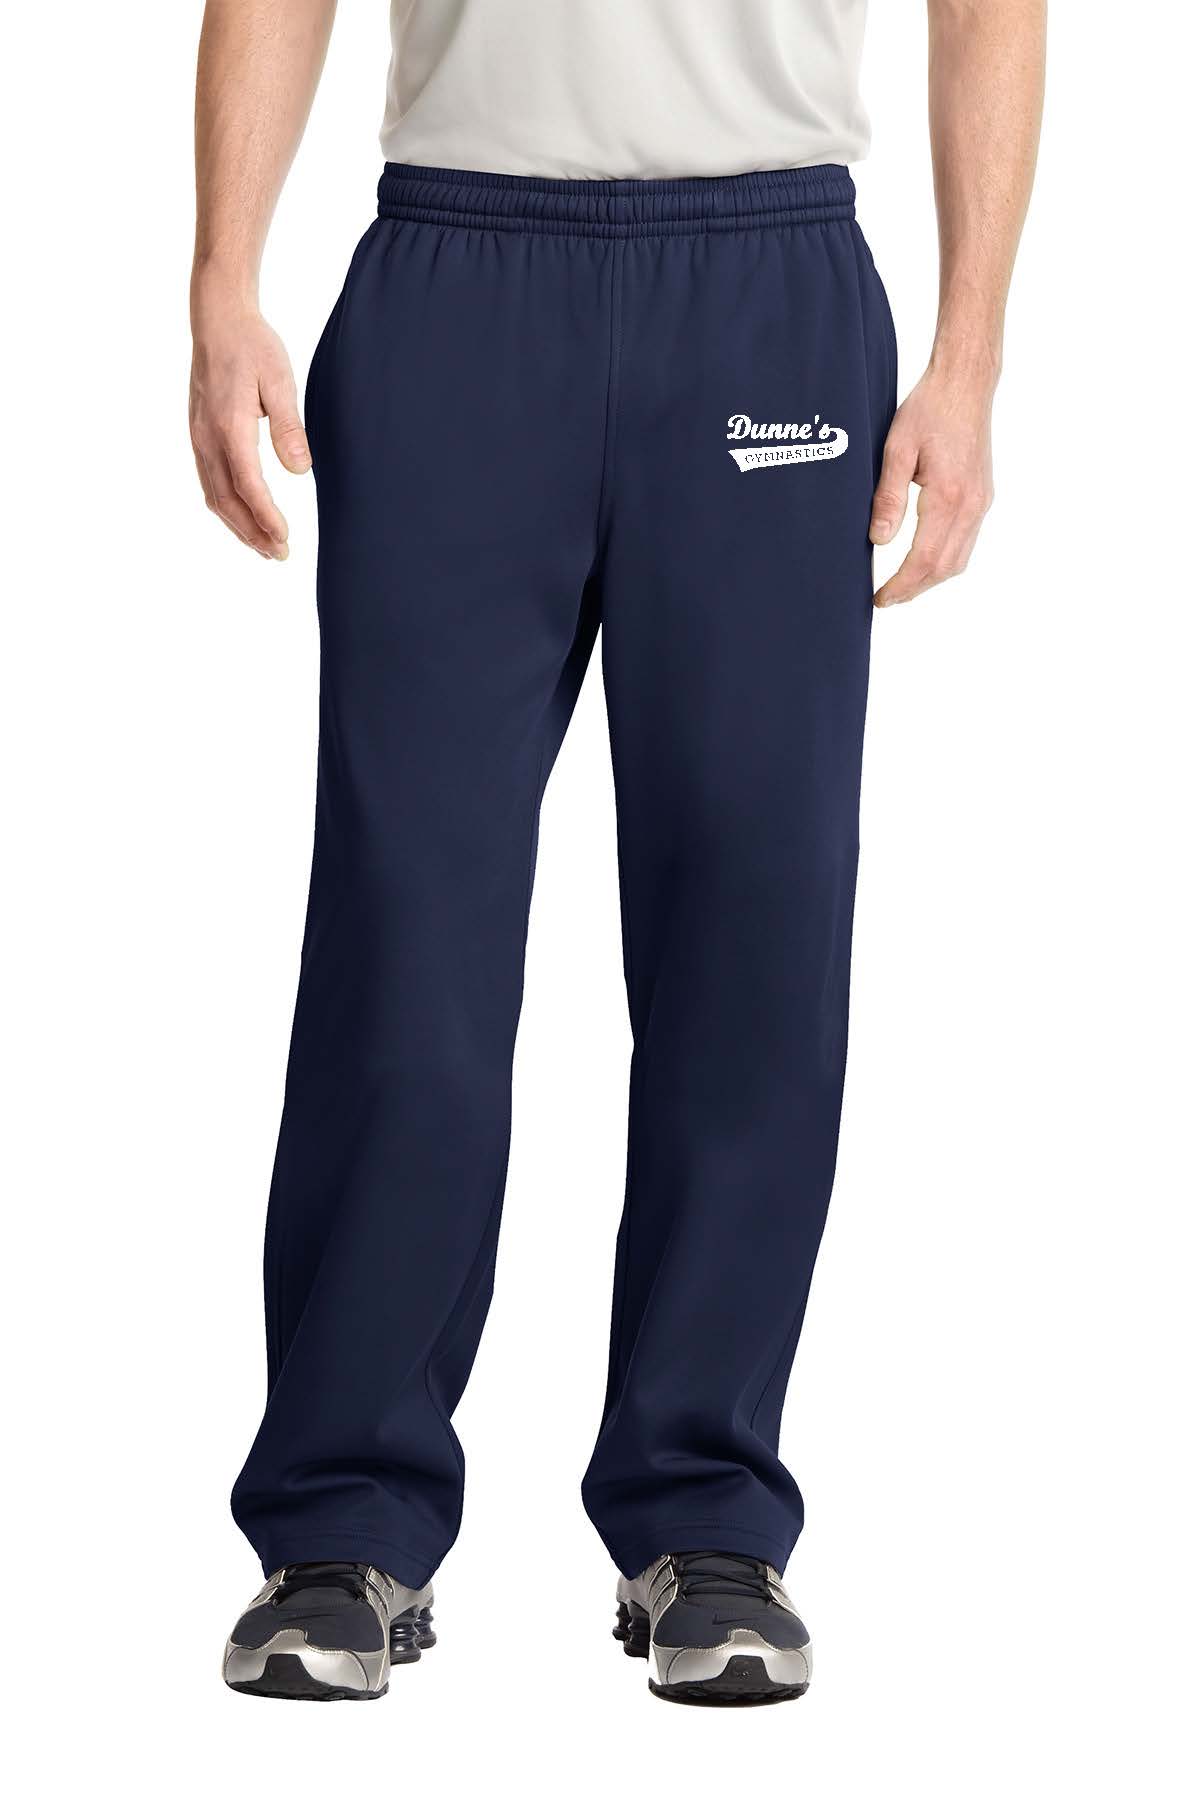 Adult Sport-Wick Fleece Pant with Dunne's Logo